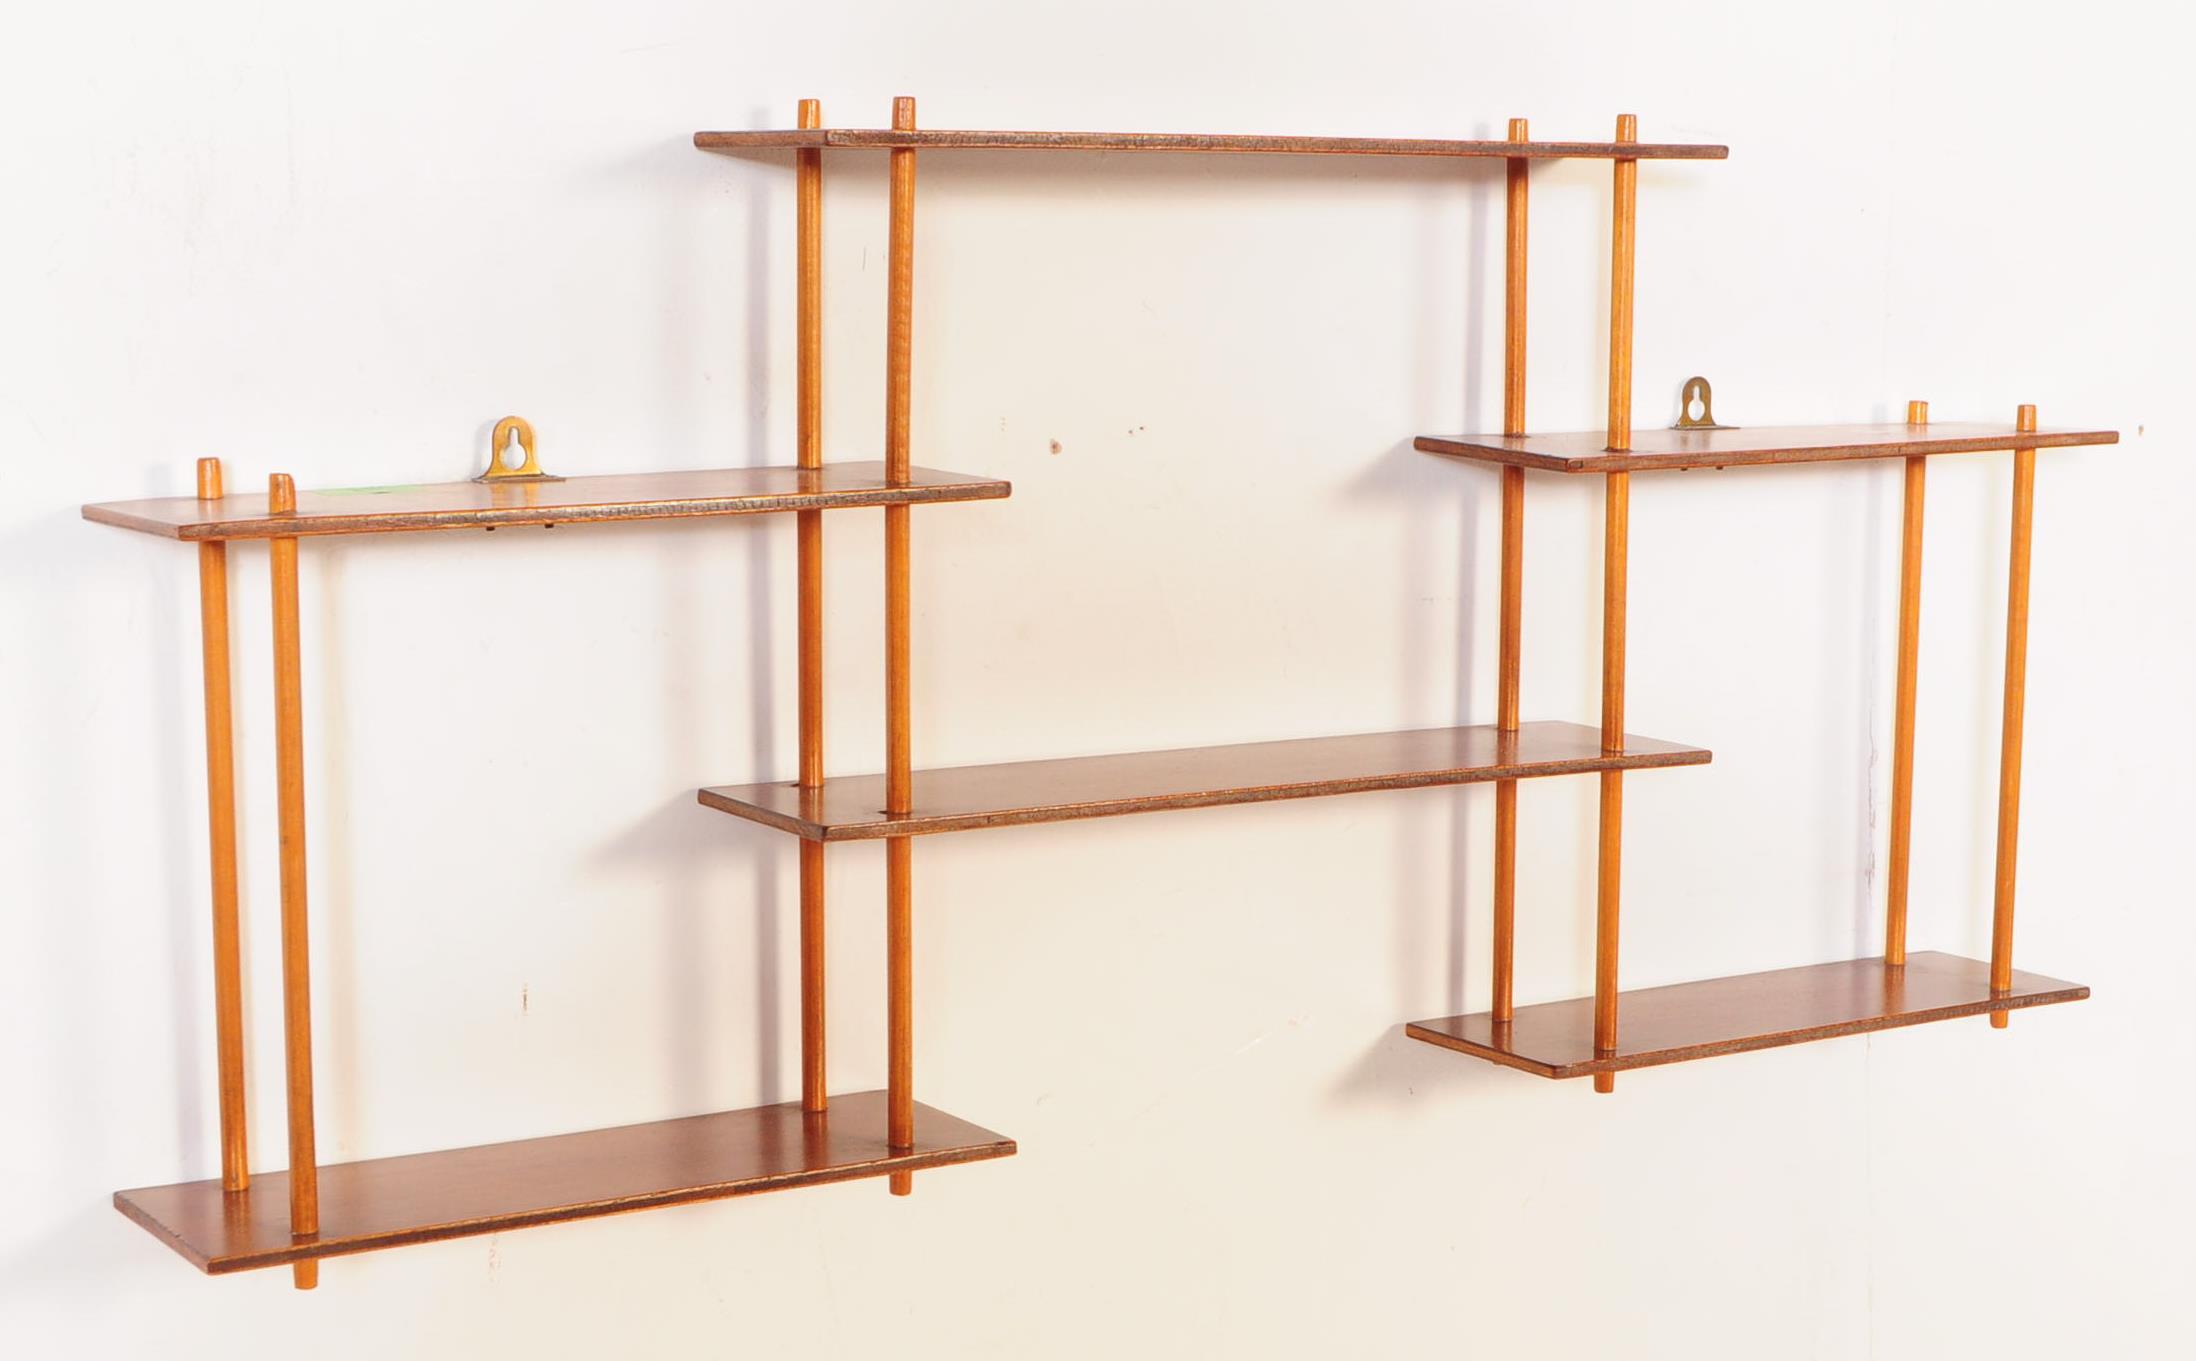 PAIR OF MID CENTURY WALL MOUNTED ETAGERE BOOKCASES - Image 3 of 6